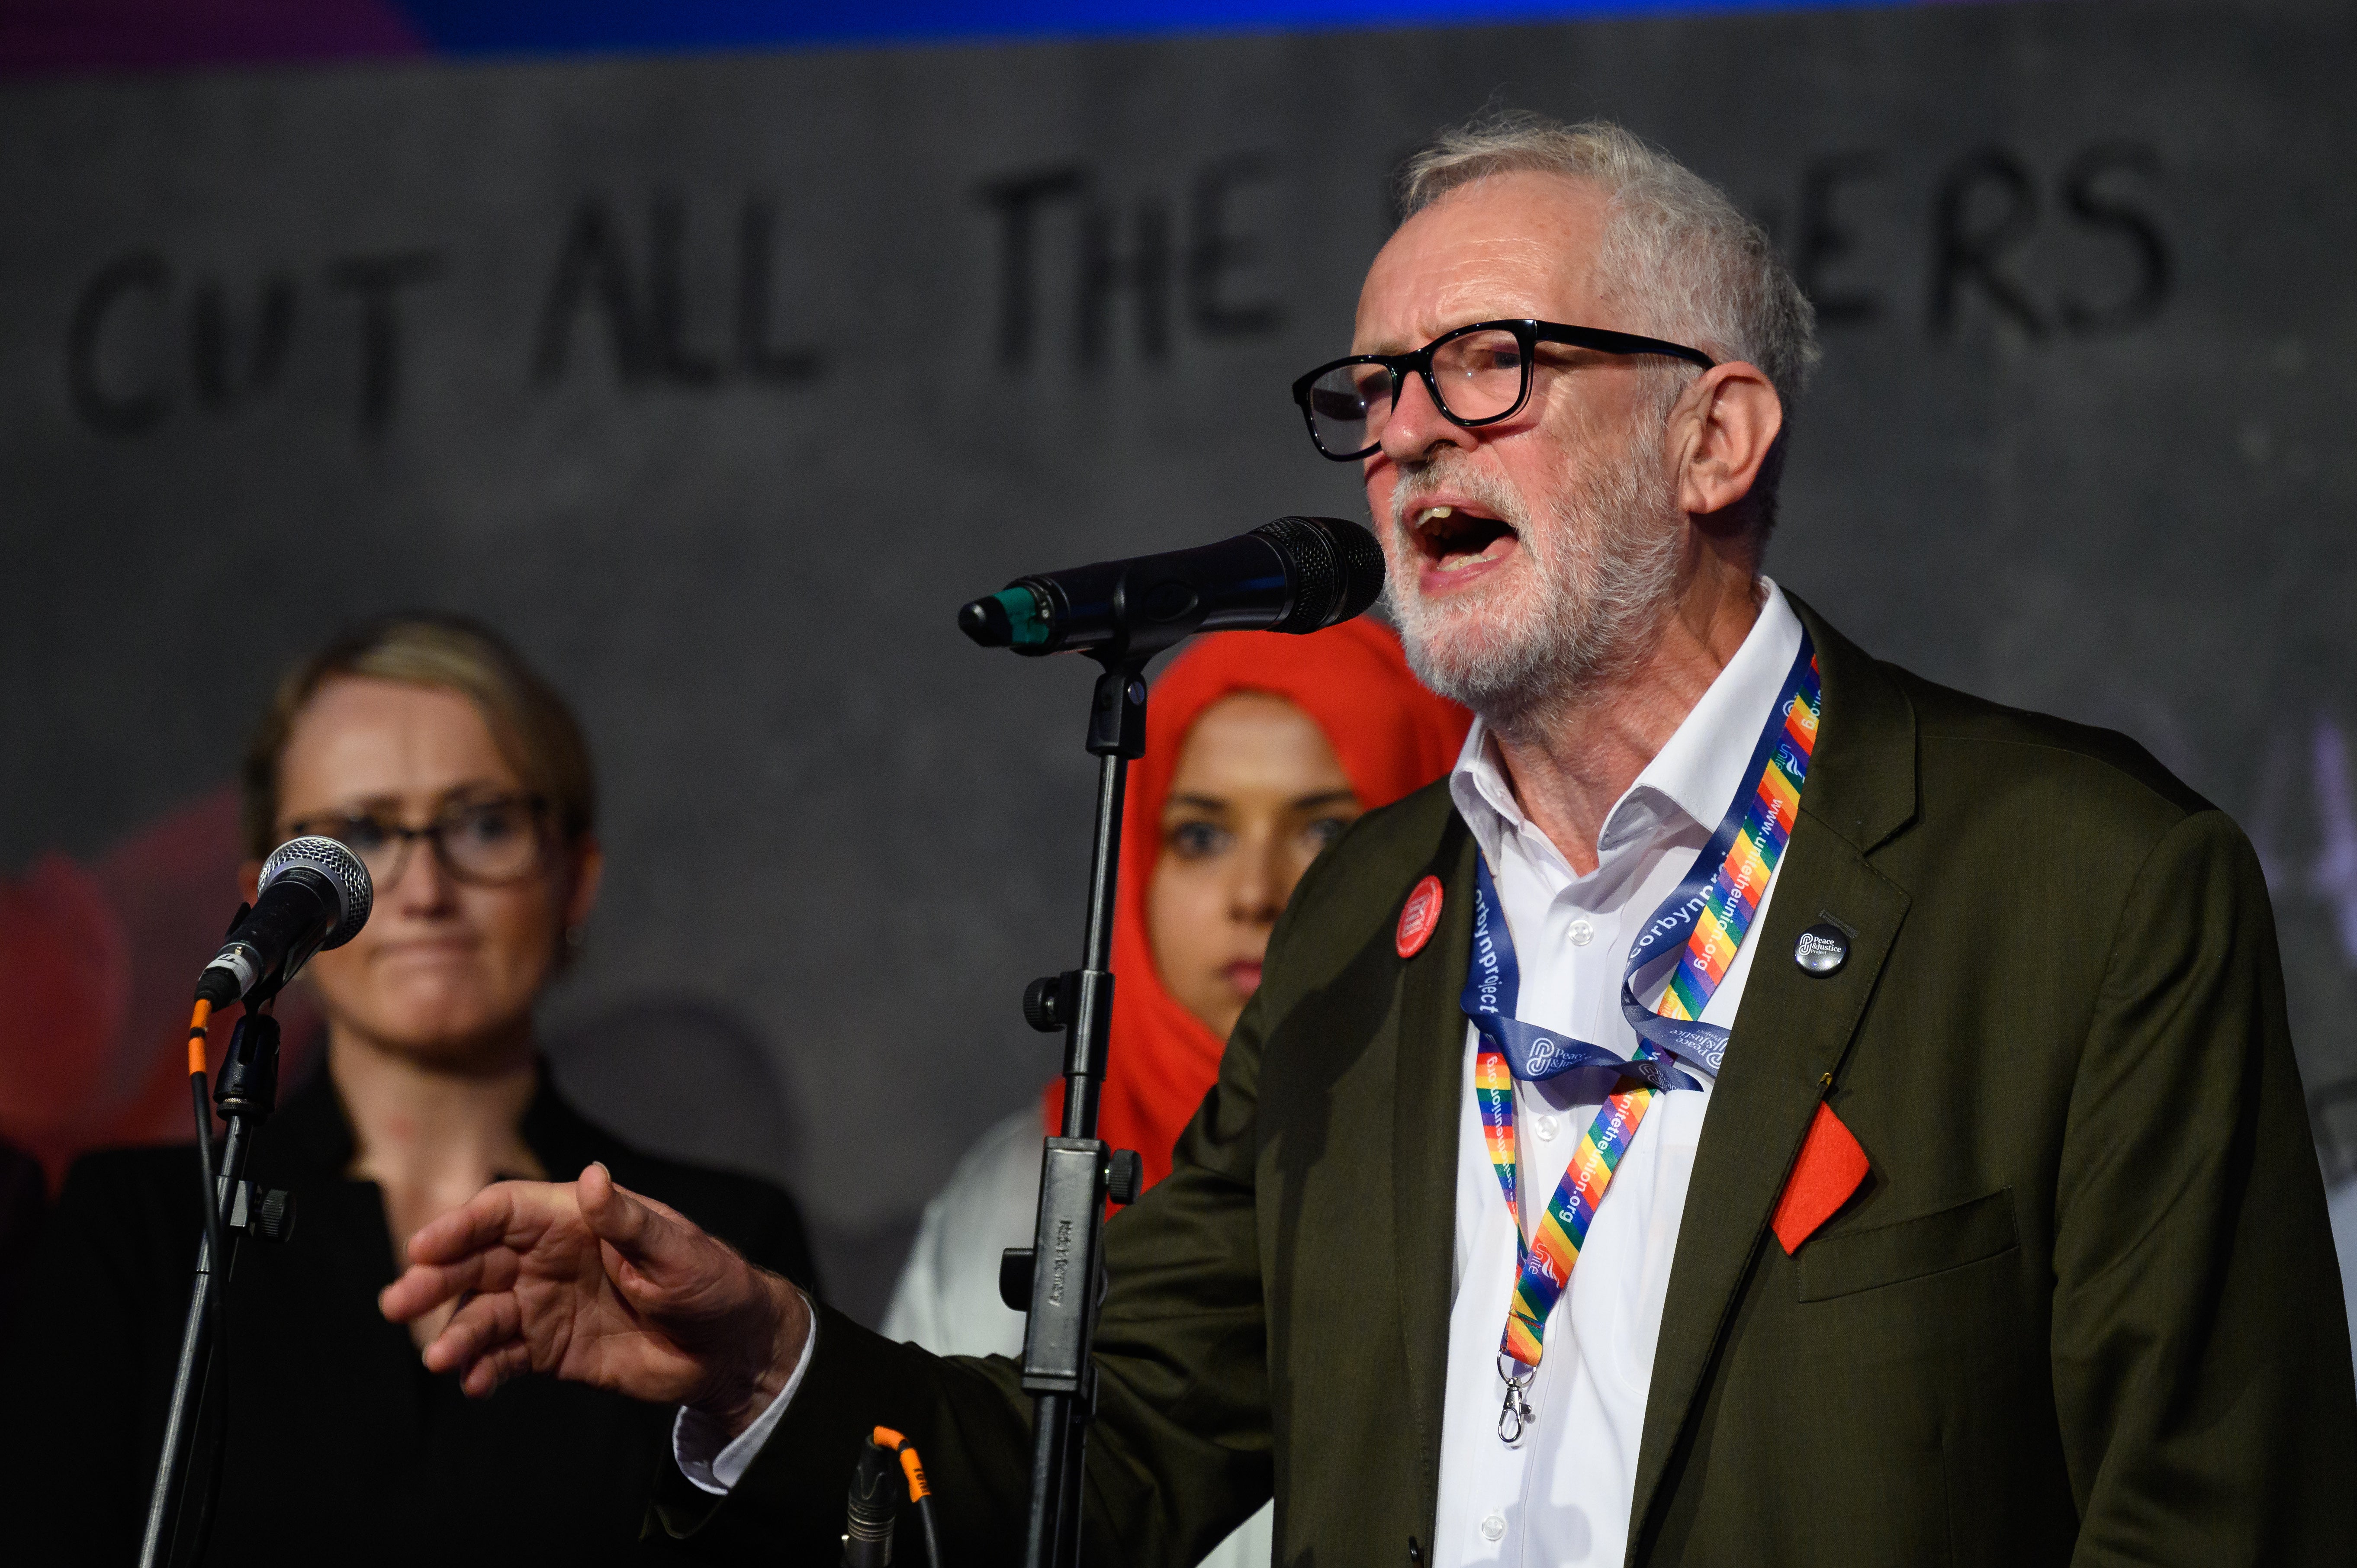 Jeremy Corbyn addresses an audience at a fringe event for political festival The World Transformed on the fourth day of the Labour conference